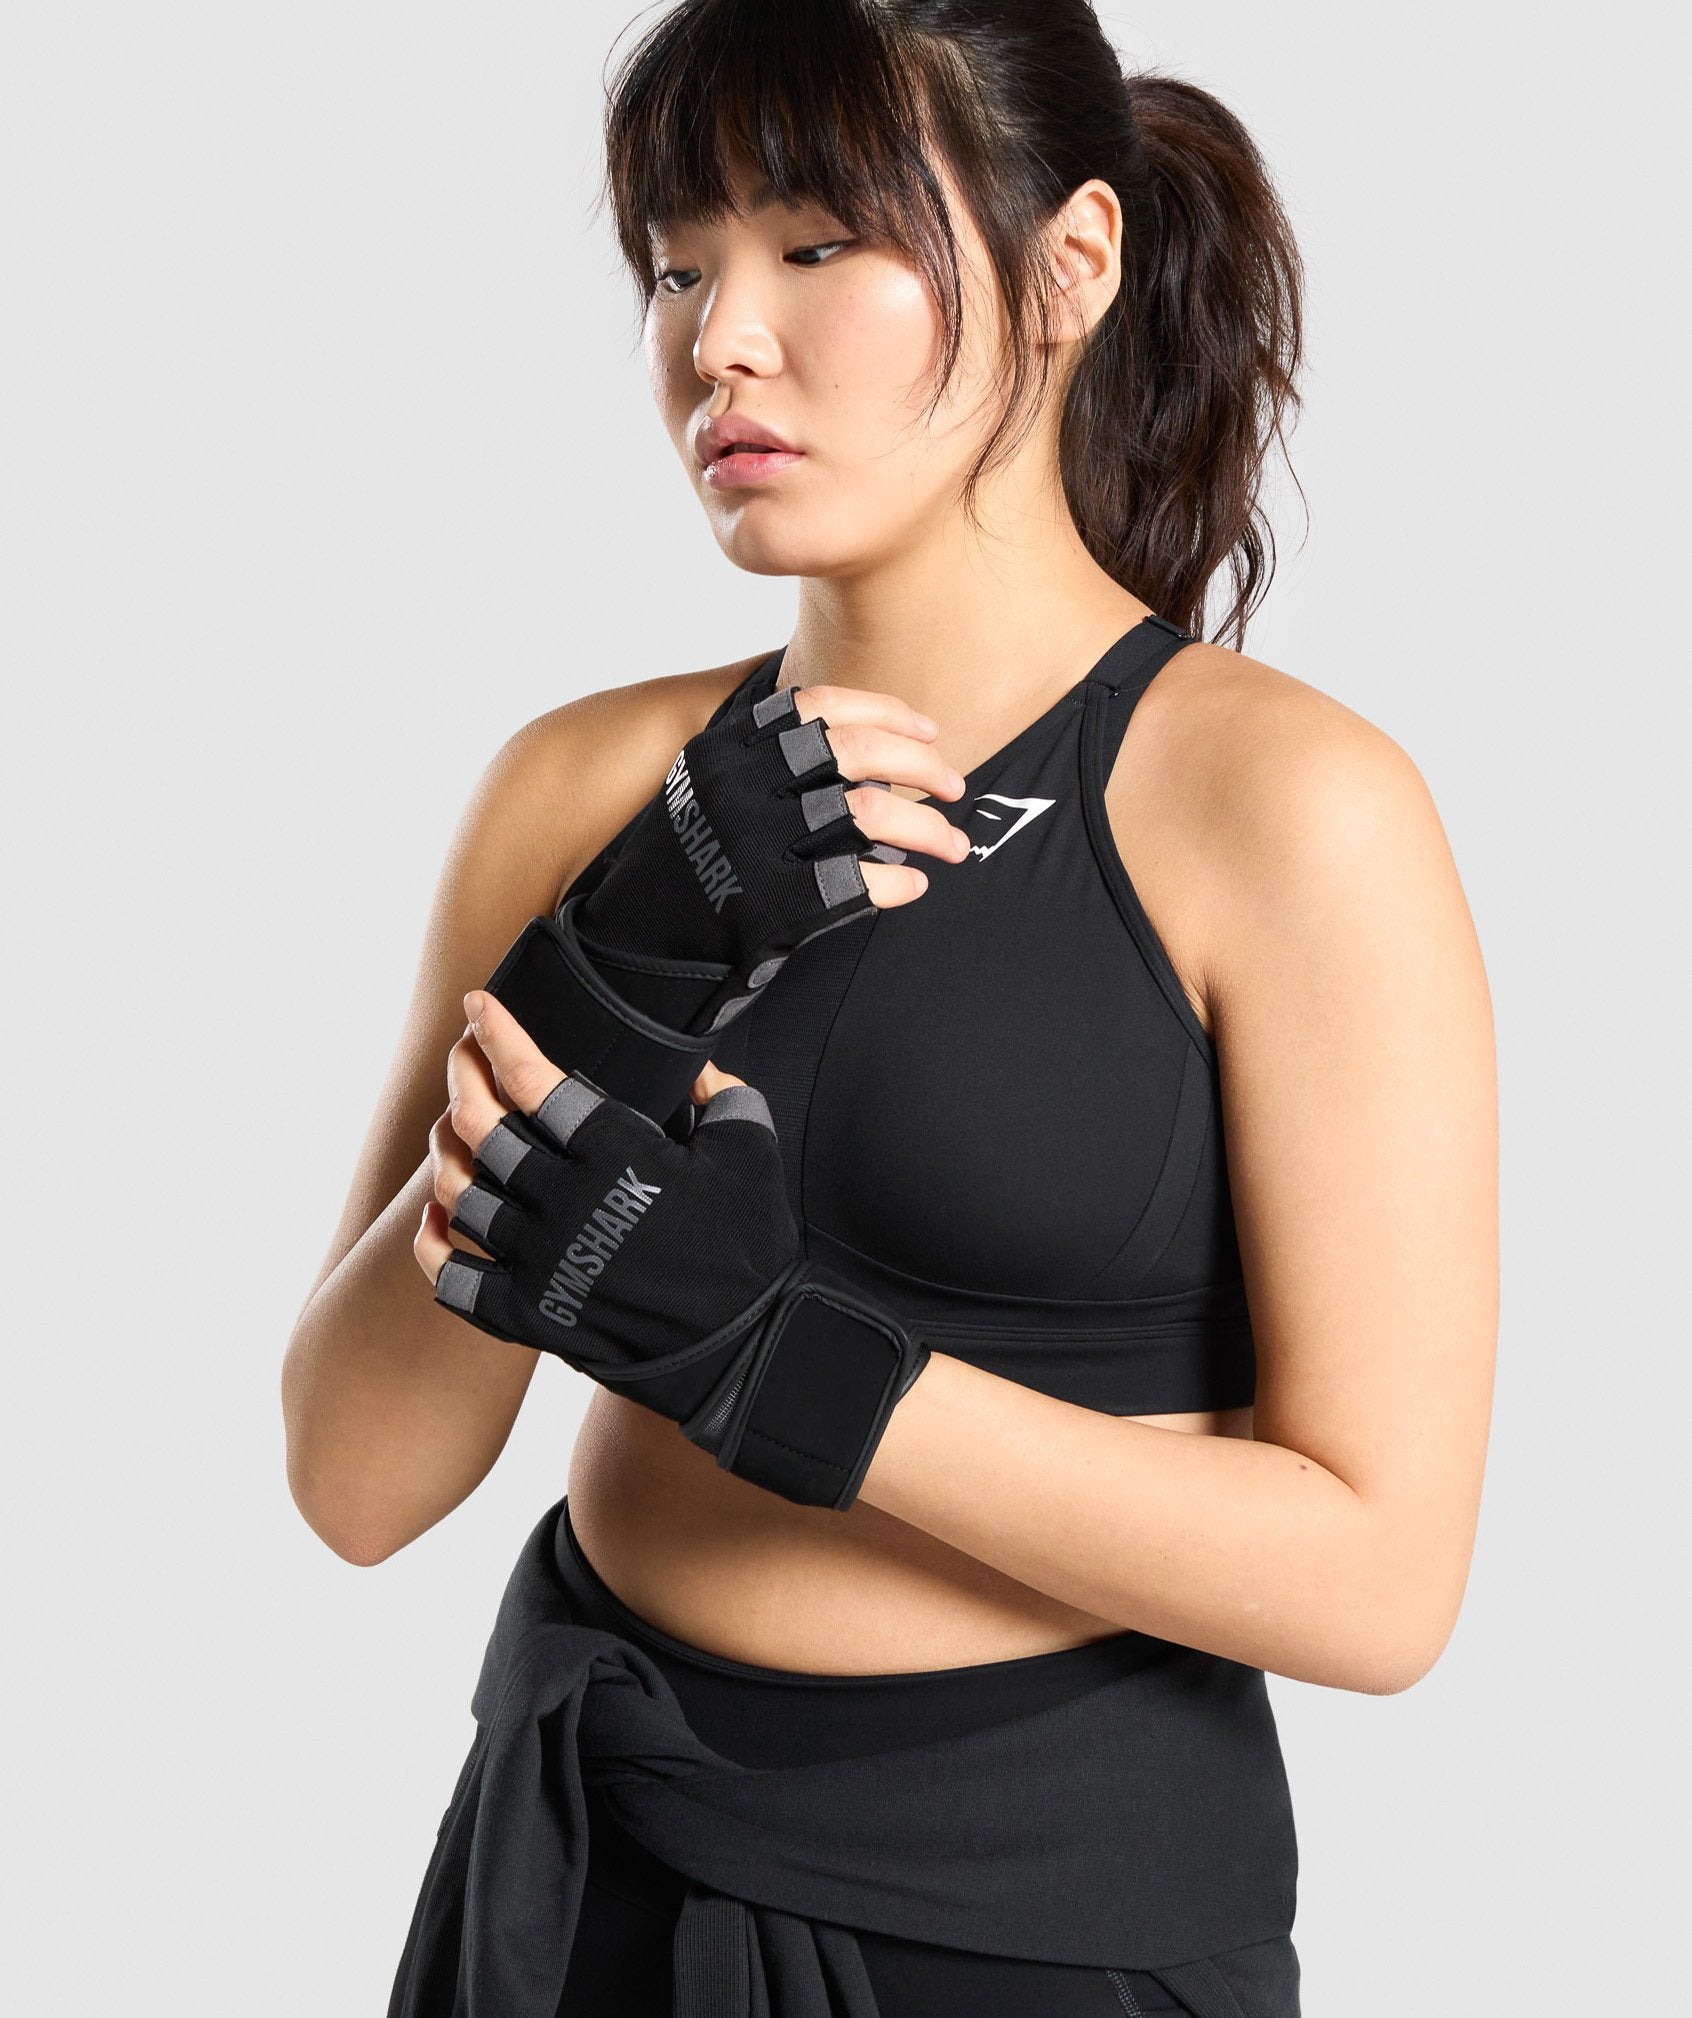 Wrap Lifting Gloves in Black - view 2